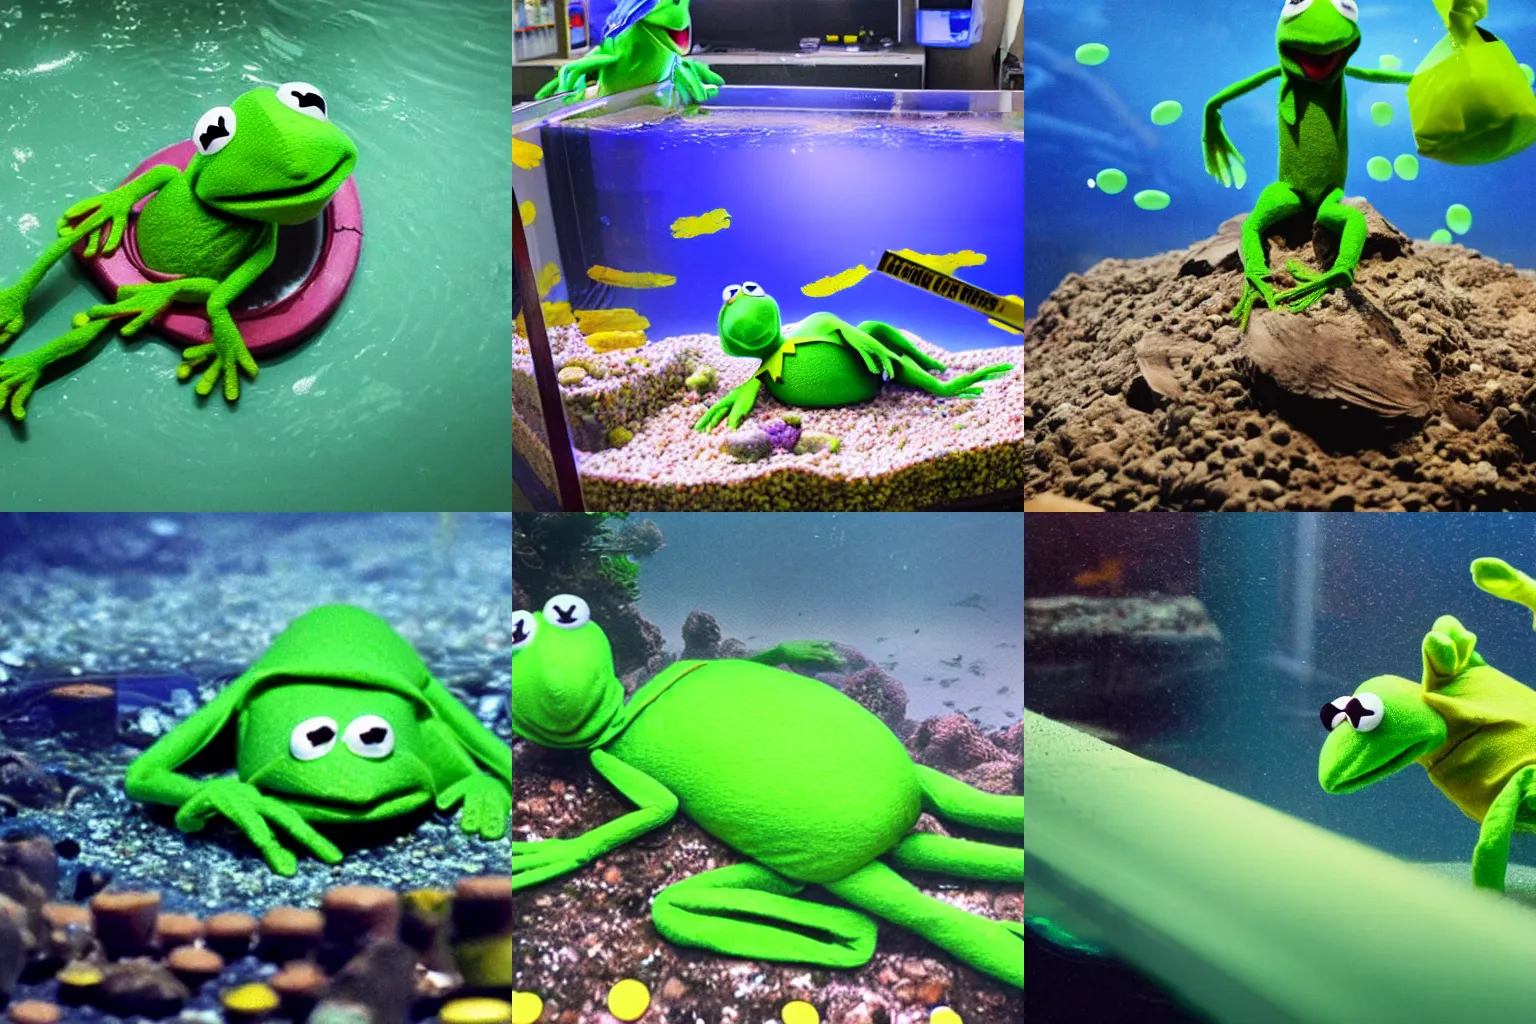 Prompt: crime scene evidence photograph of Kermit the Frog's body floating in a giant aquarium